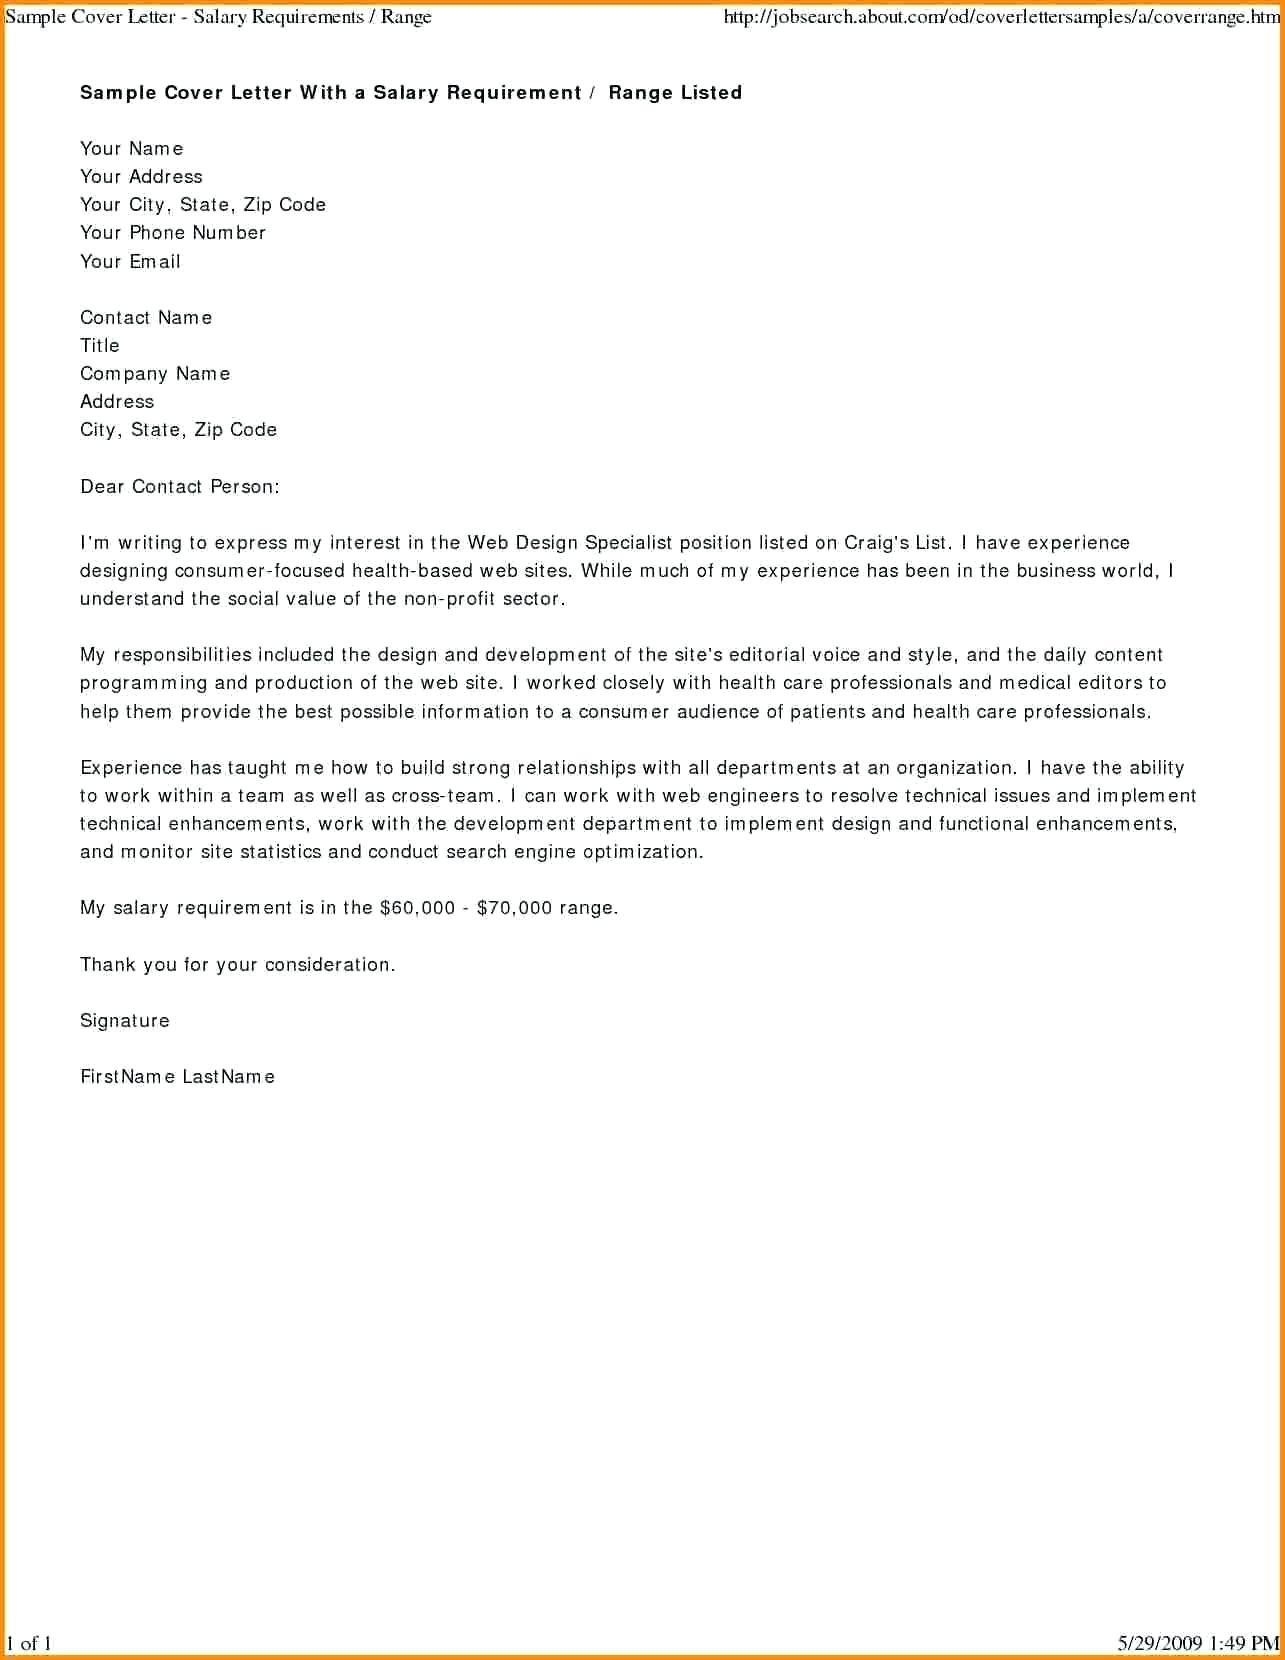 Expired Listing Letter Template Free Expired Listing Letter Template Samples